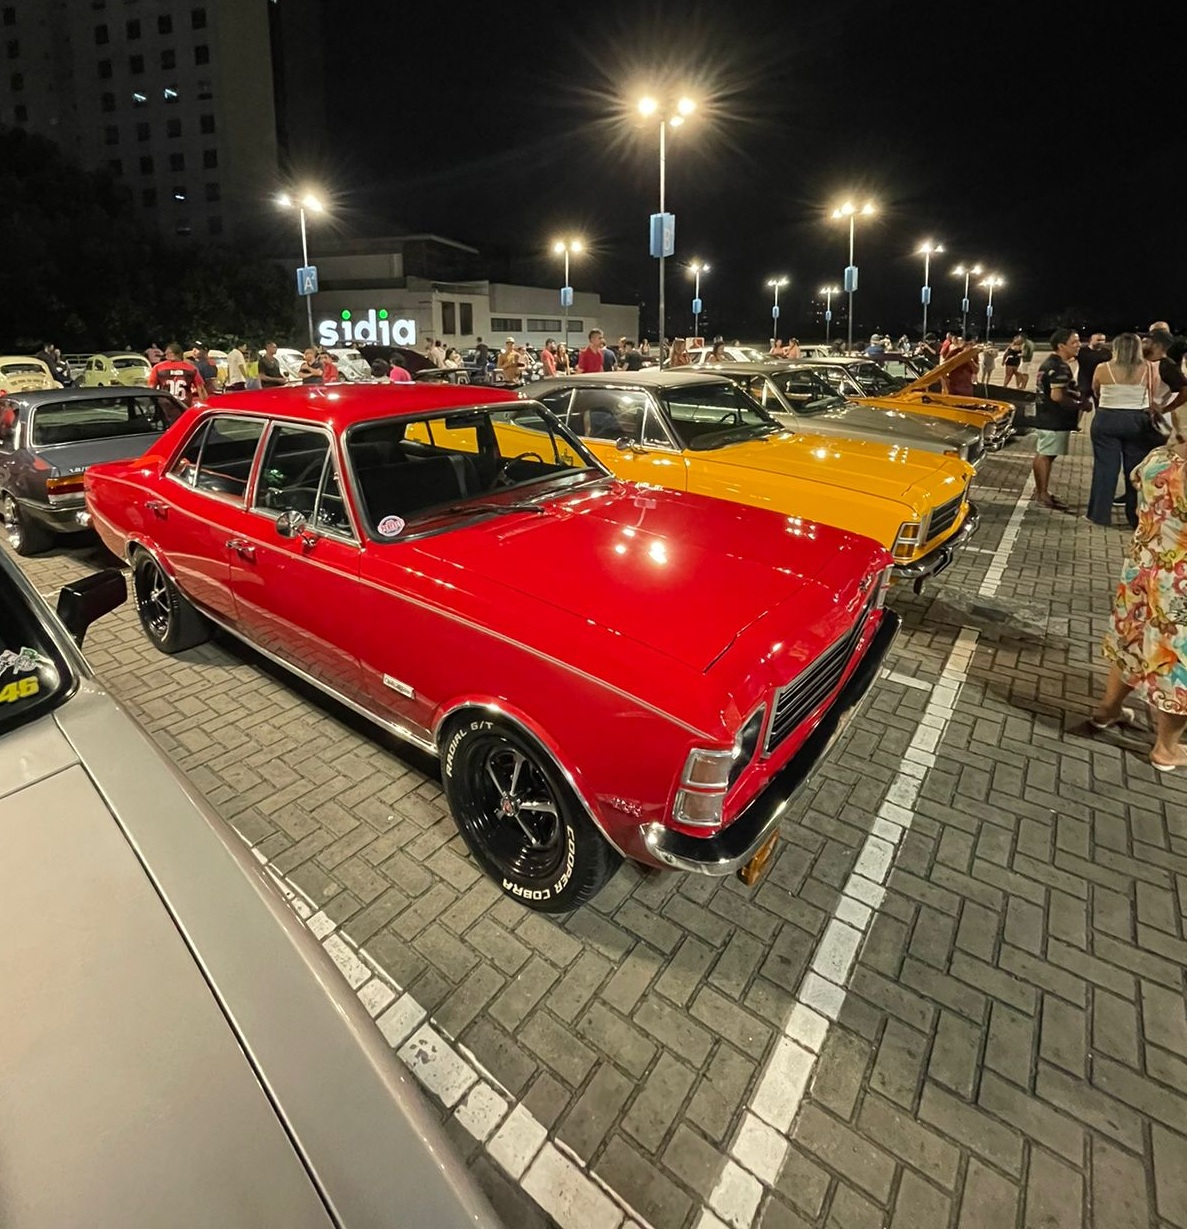 Exhibition of vintage cars takes place in Shopping de Manaus, this Sunday (9)